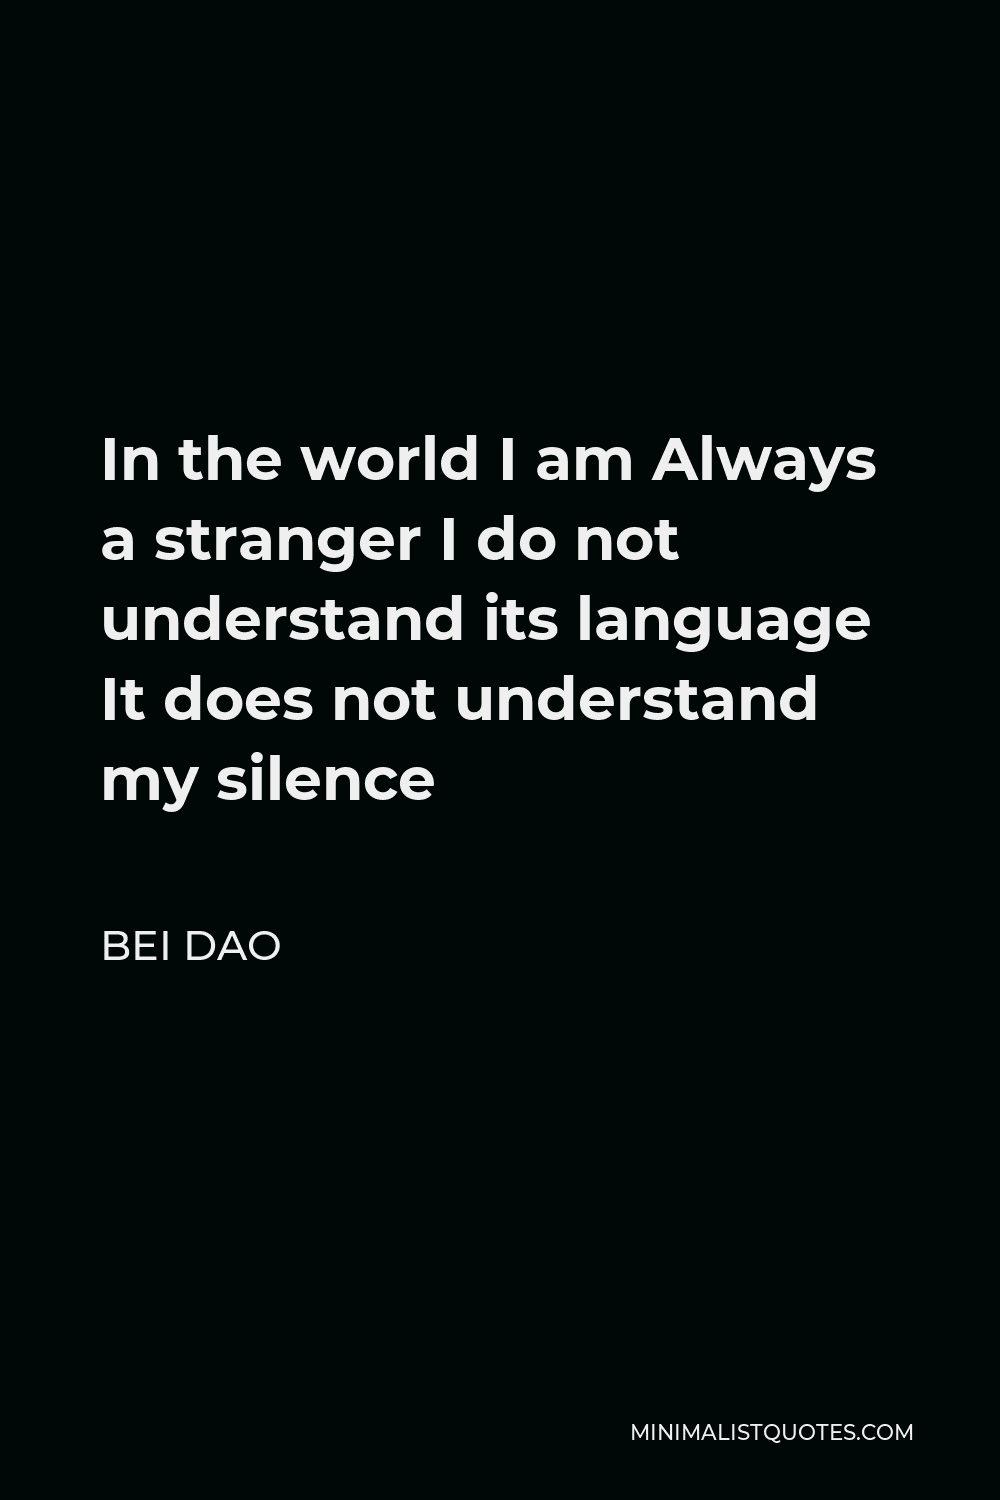 Bei Dao Quote - In the world I am Always a stranger I do not understand its language It does not understand my silence